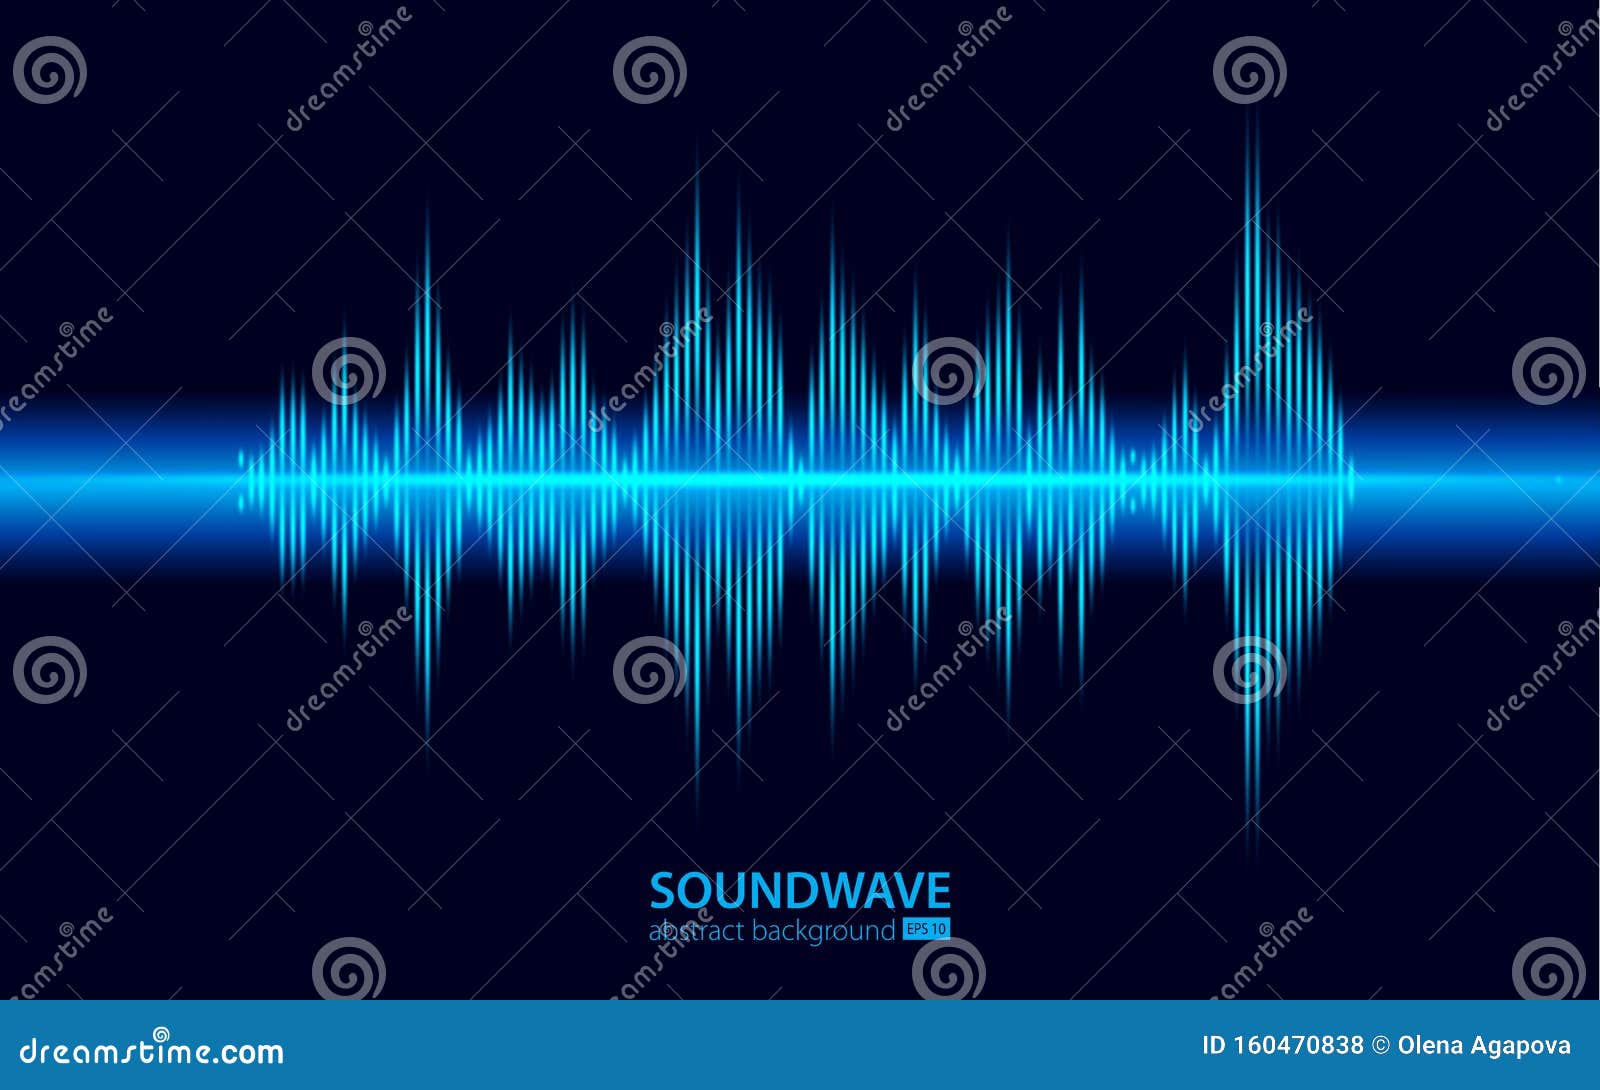 Soundwave Vector Abstract Background Music Radio Wave Sign Of Audio Digital Record Vibration Pulse And Music Stock Vector Illustration Of Abstract Modern 160470838